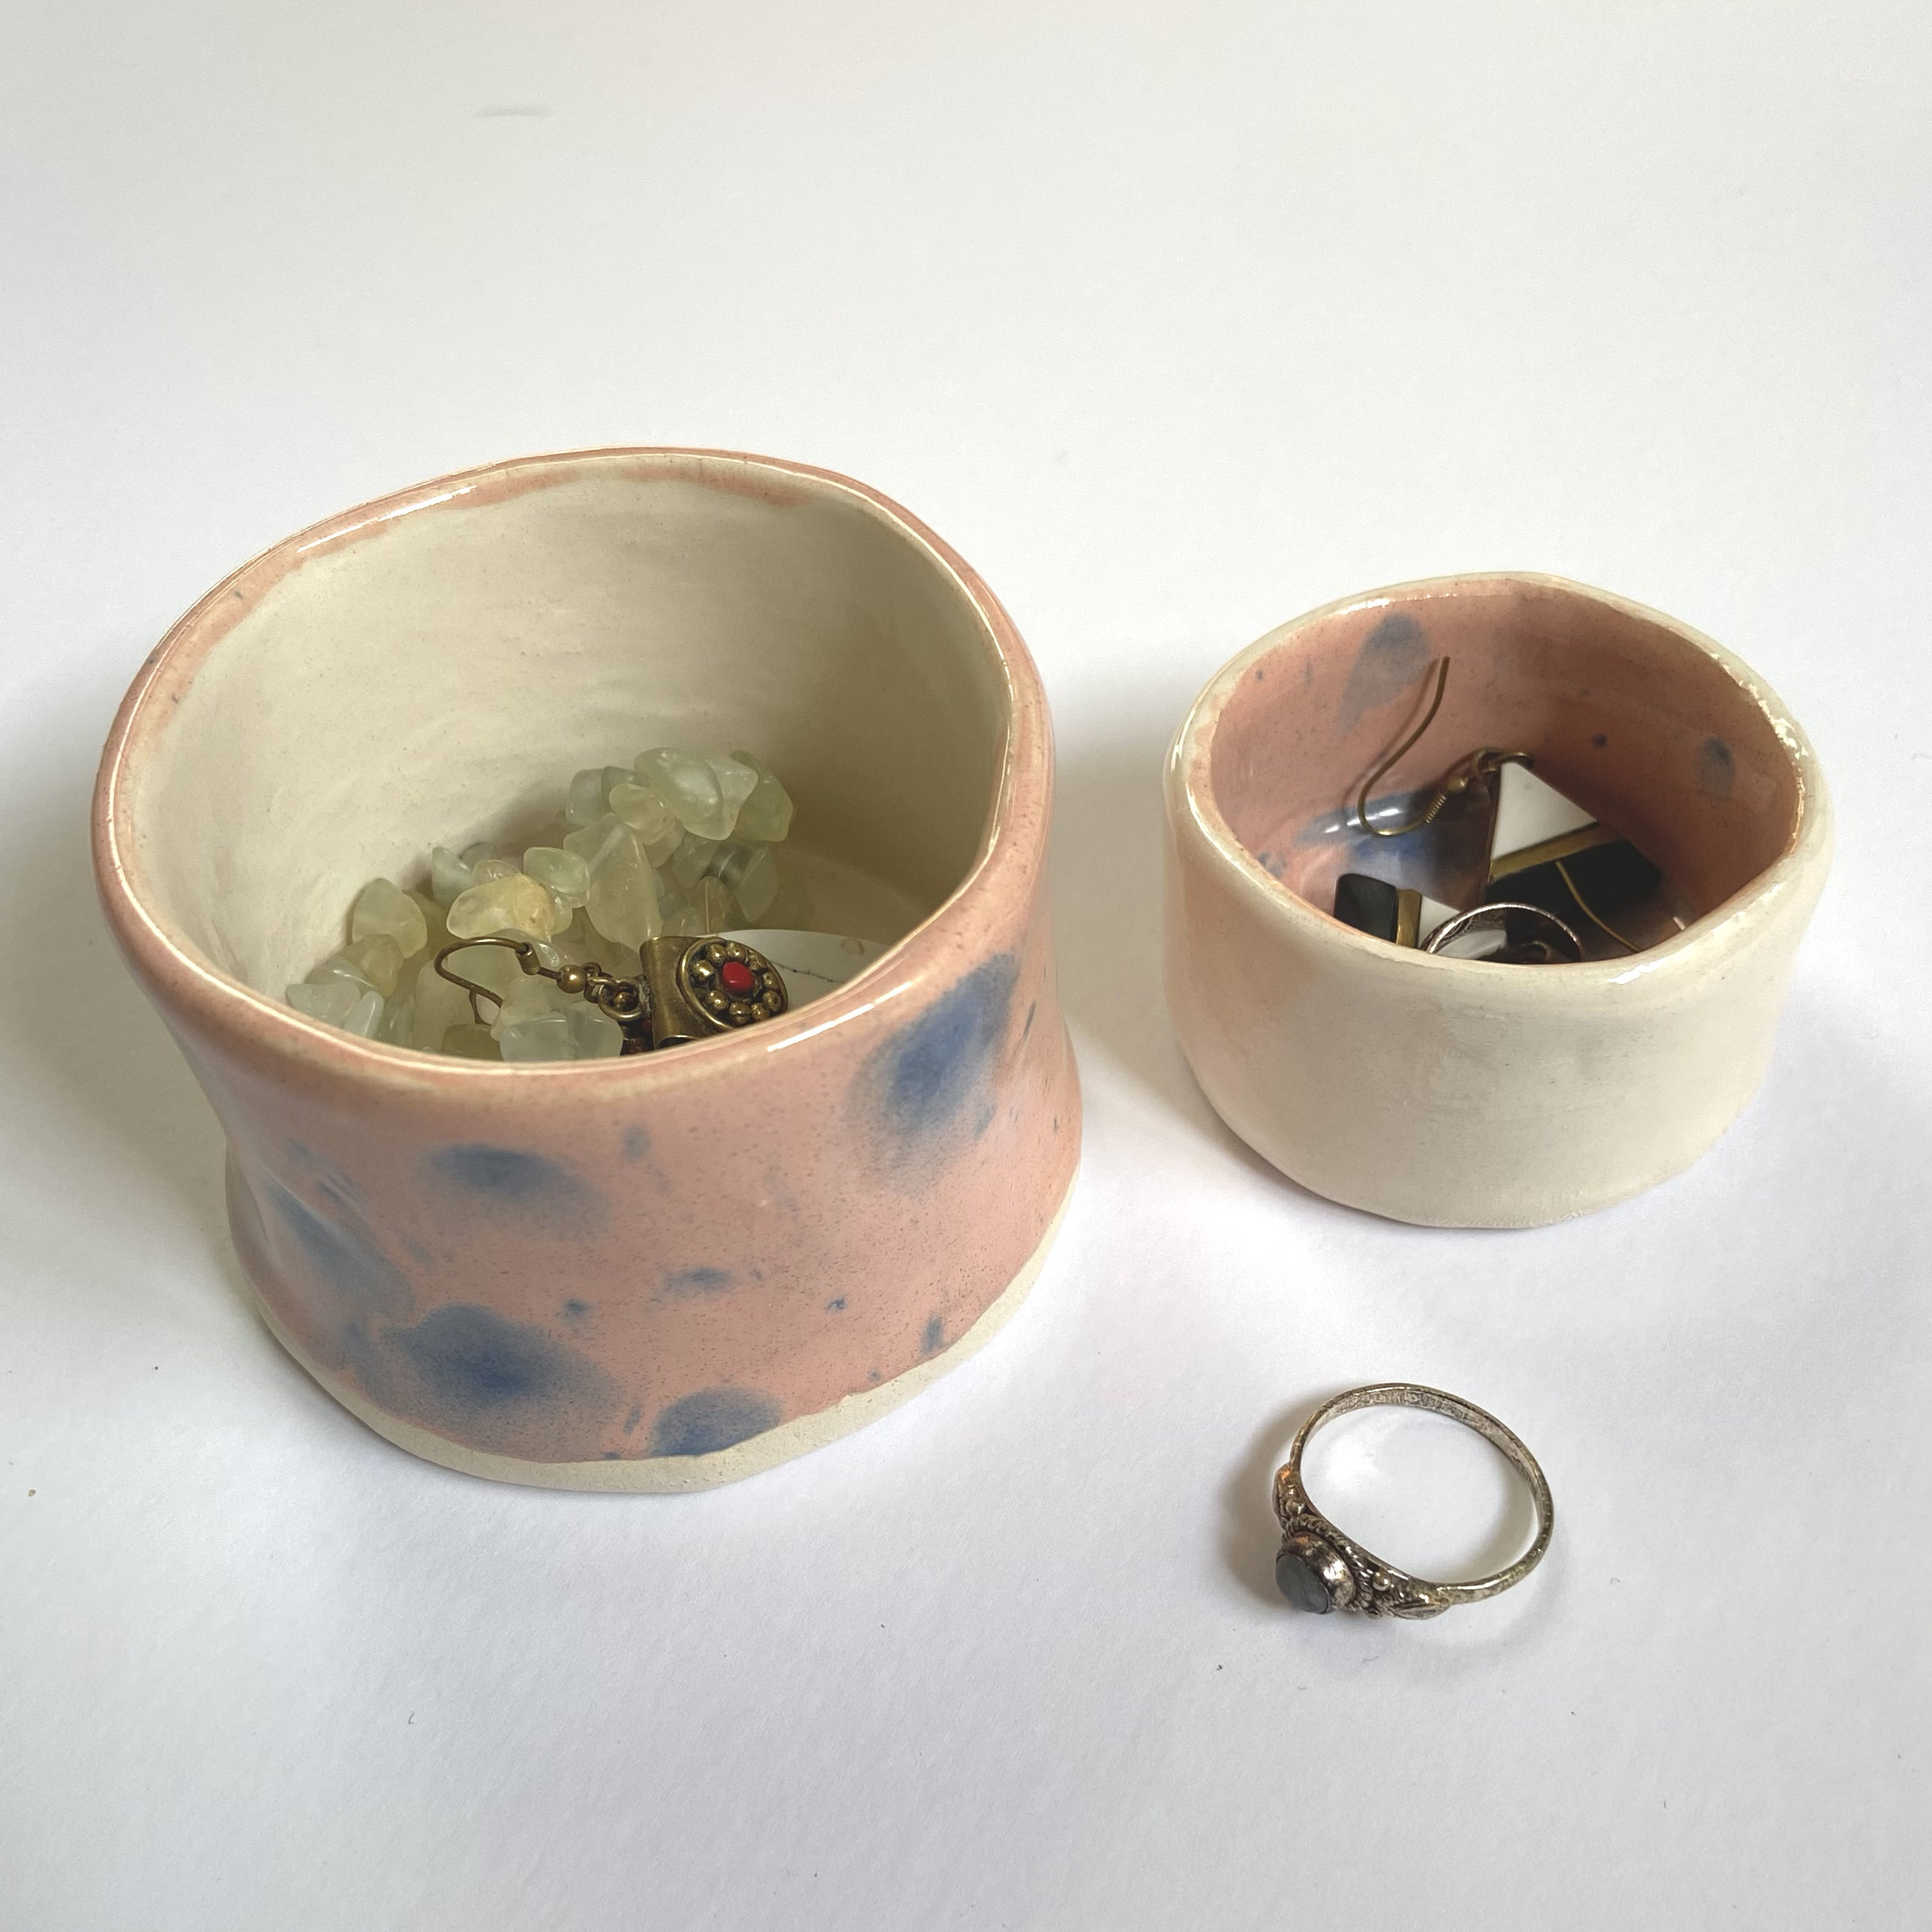 Trinket Pots Handmade Ceramic Pottery - Pink With Blue Splatter. Small Jewellery Dishes